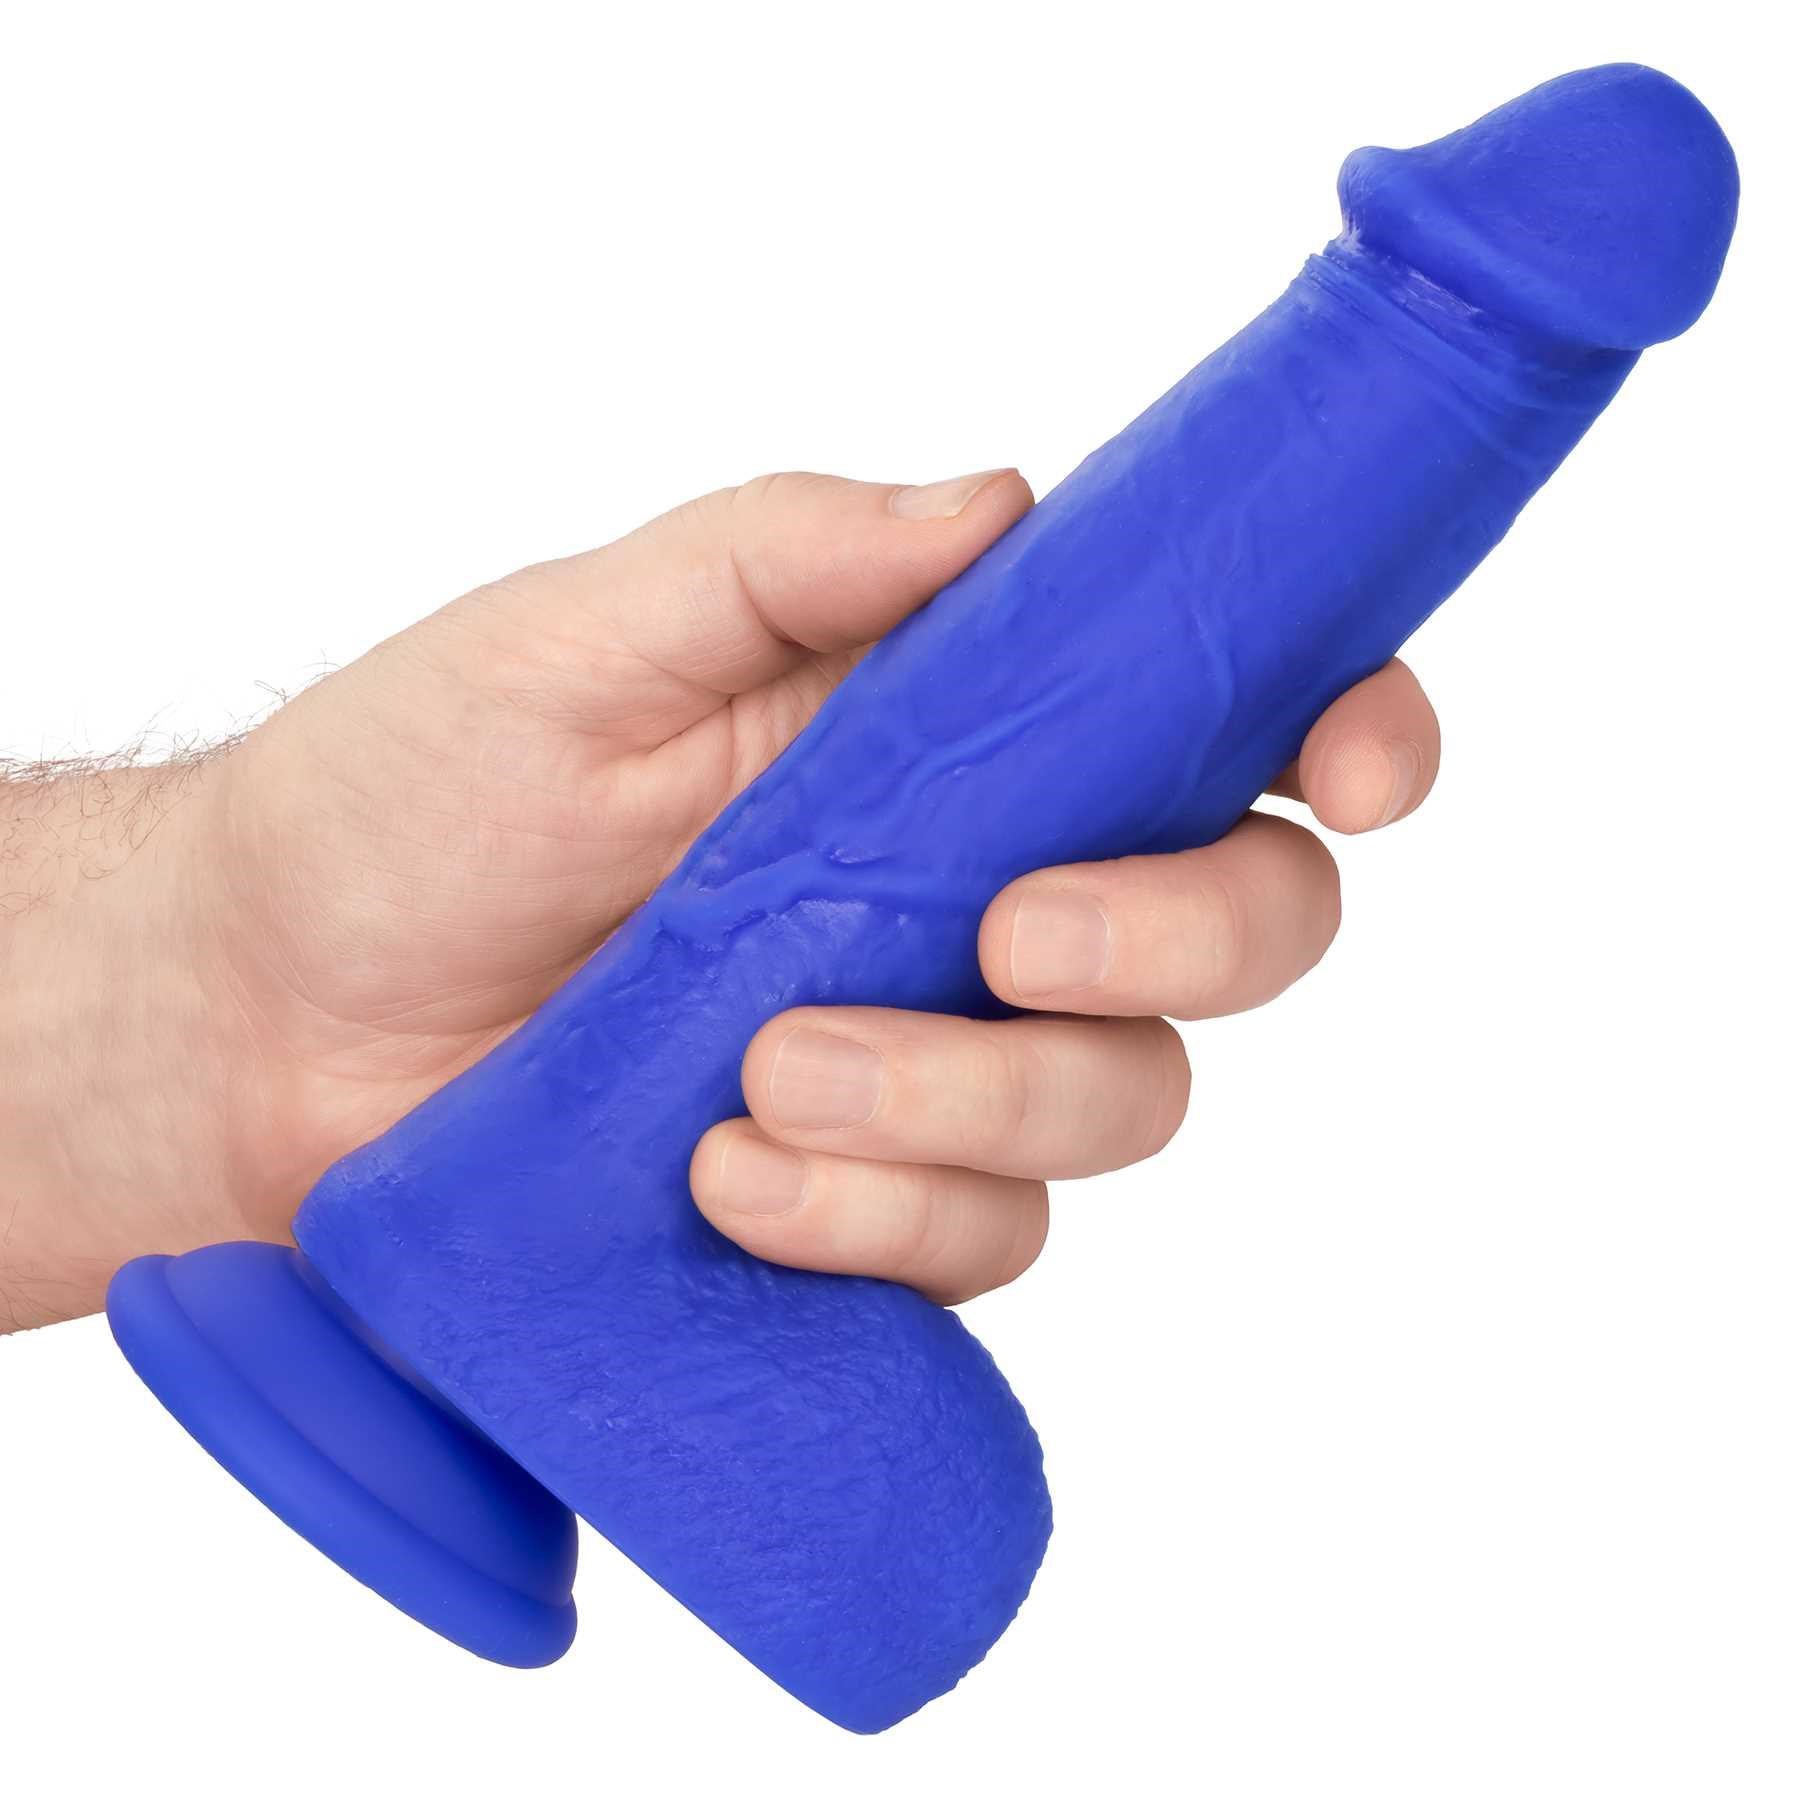 Admiral 8 Inch Vibrating Captain Dildo hand held